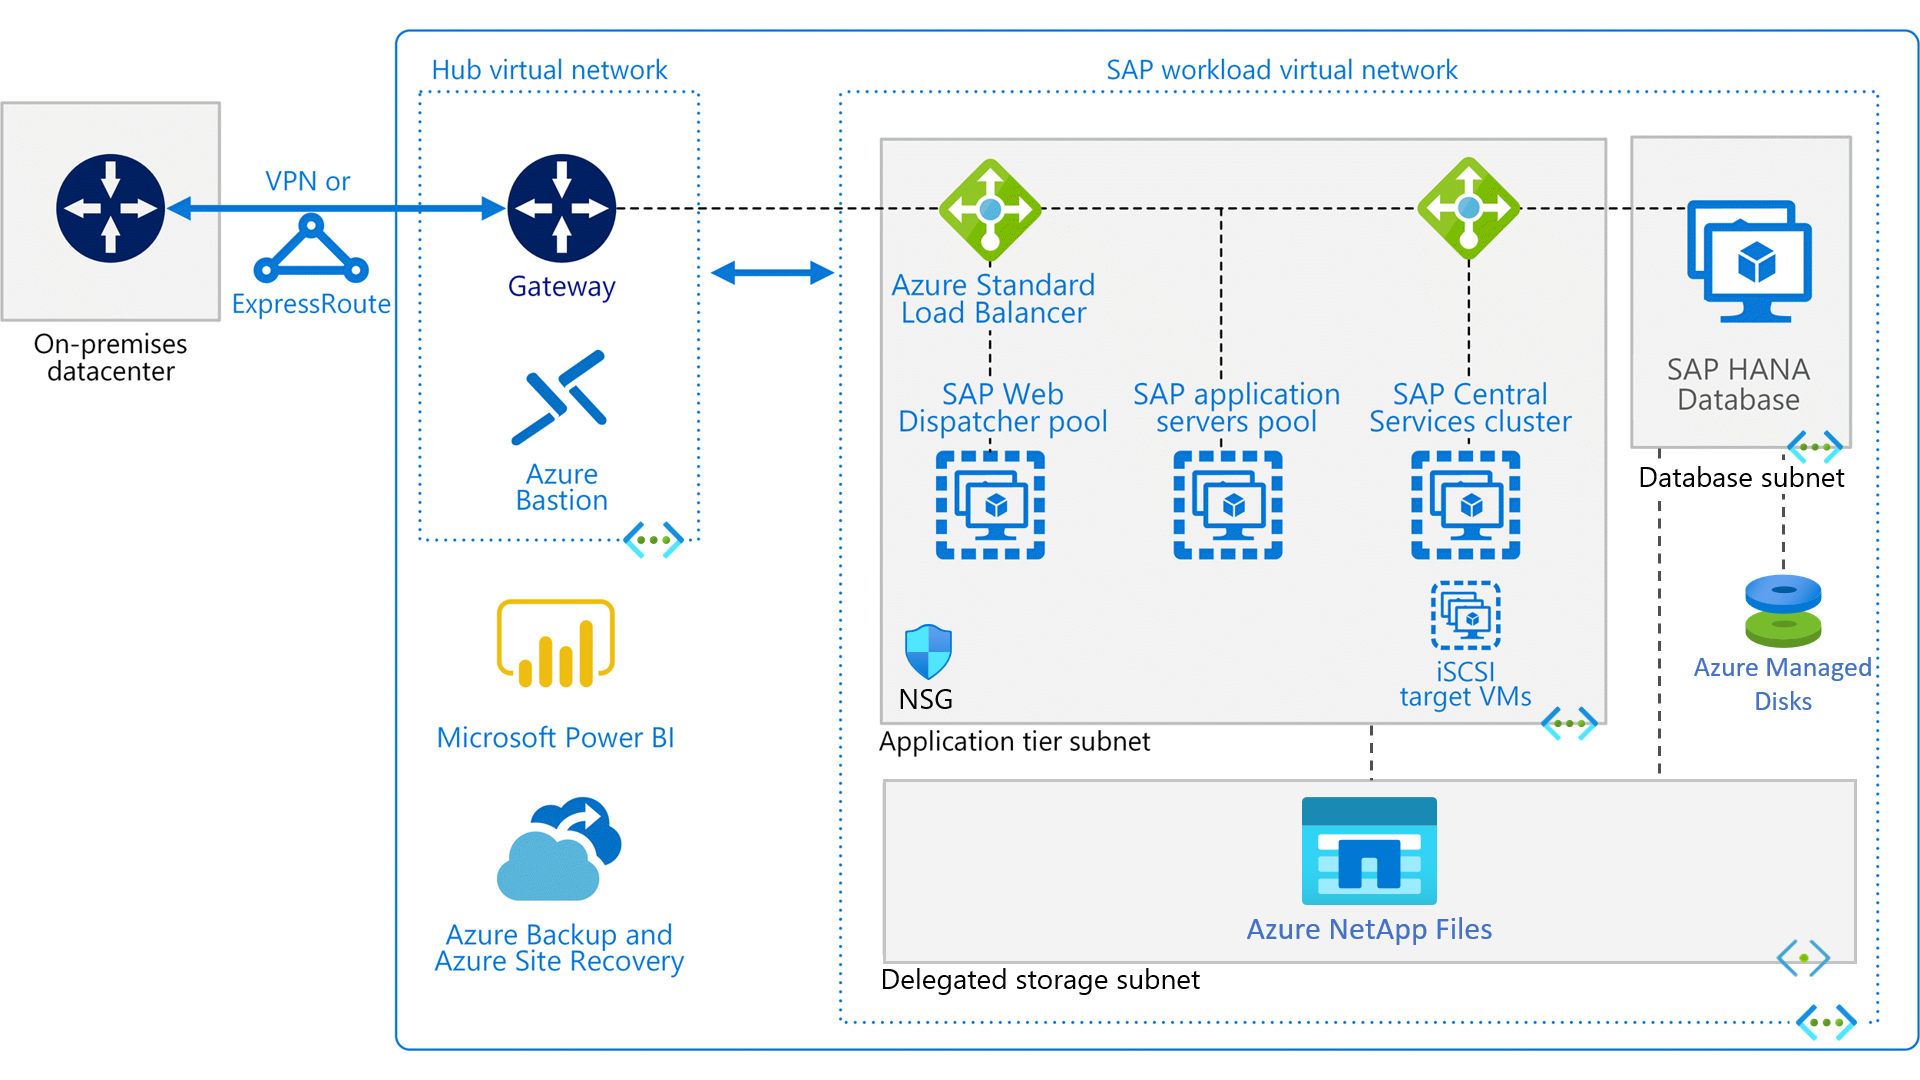 Reference architecture shows a set of proven practices for running SAP HANA in a high-availability, scale-up environment that supports disaster recovery on Azure